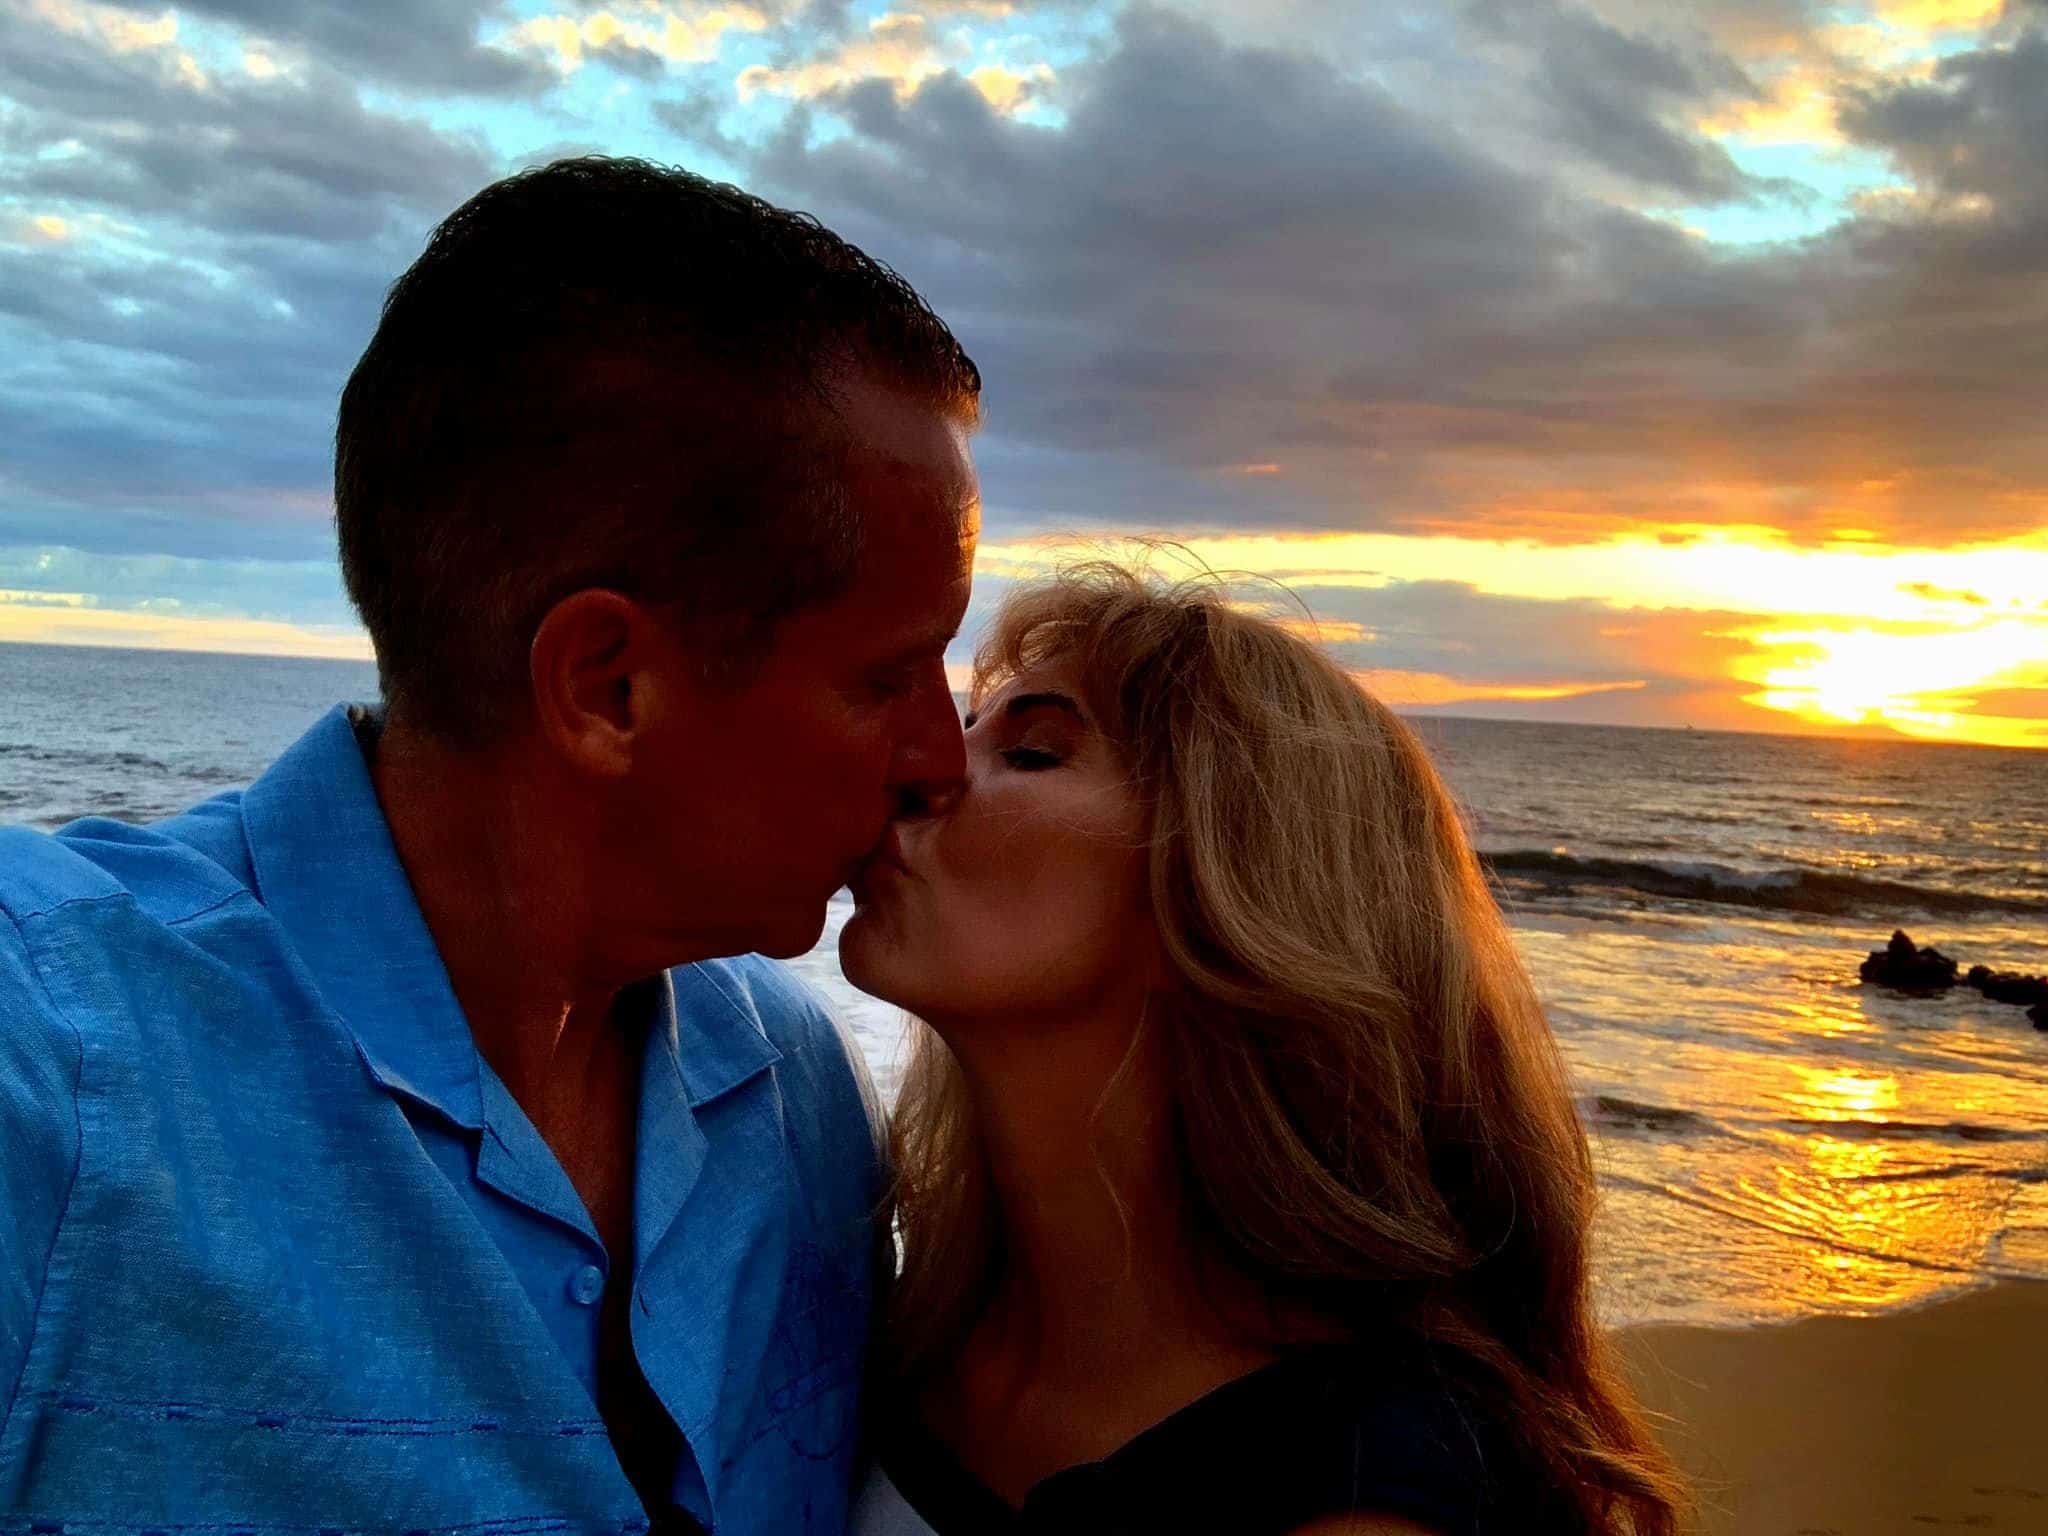 A man and woman keeping the flame alive as they kiss on the beach at sunset